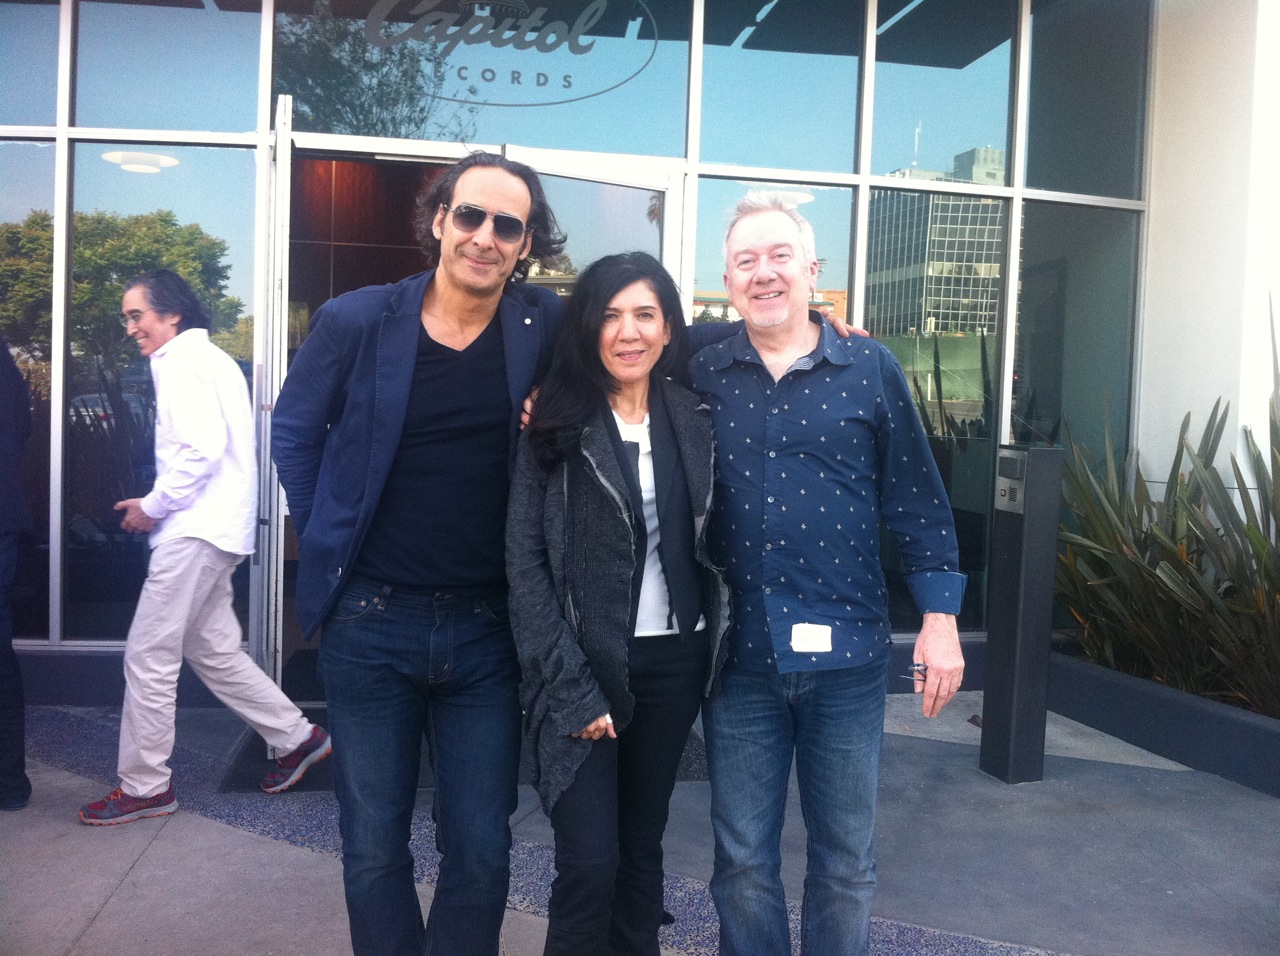 Alexandre Desplat, Sussan Deyhim and Richard Ford. Argo Scoring sessions at Capitol Records May 2012